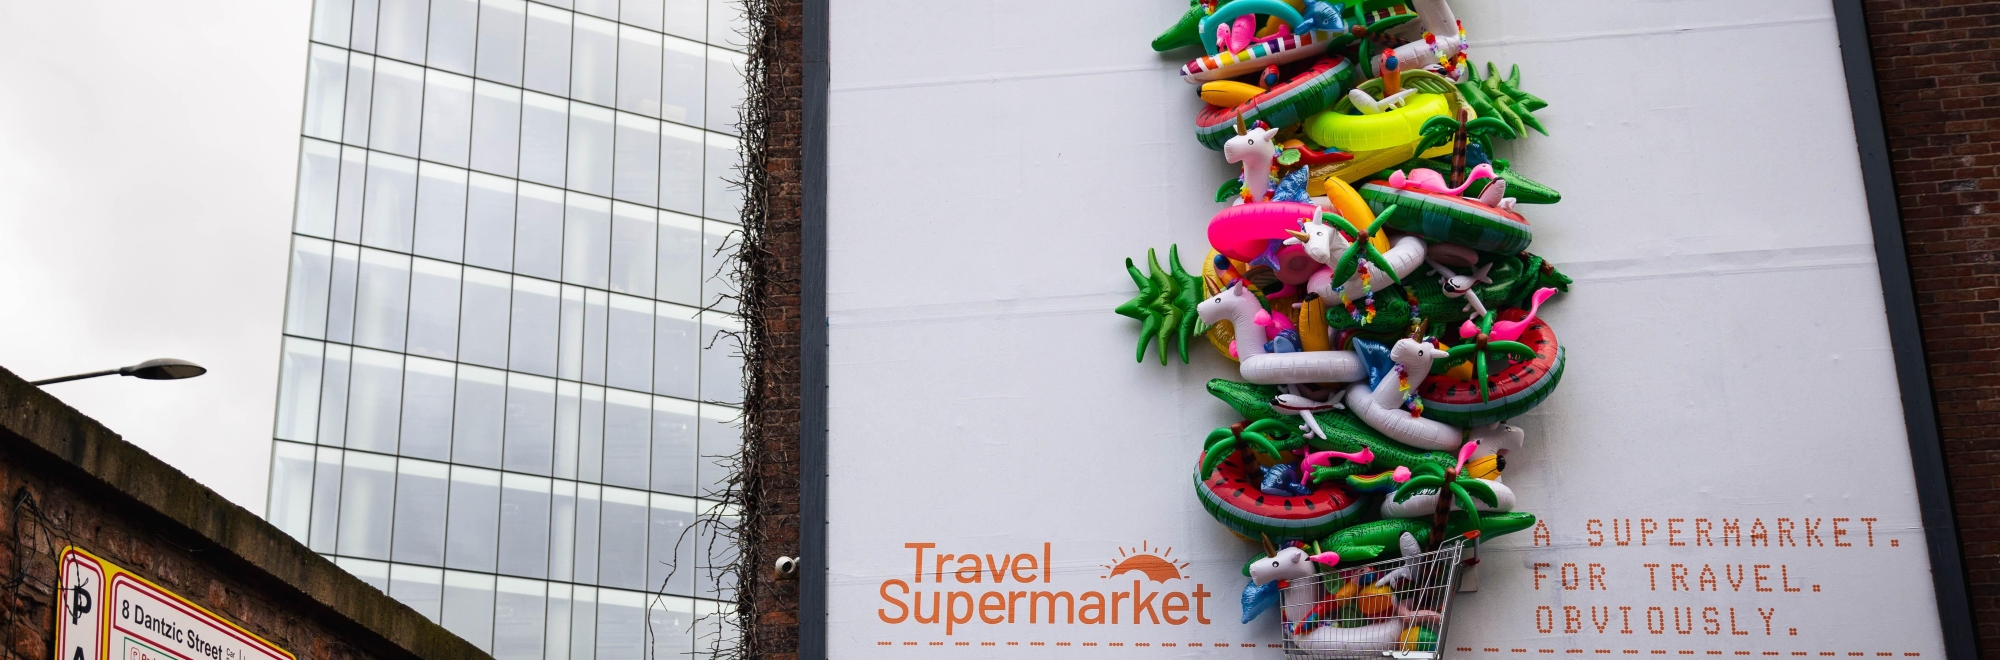 Huge 3-D TravelSupermarket trolley filled with inflatables blows up in Manchester